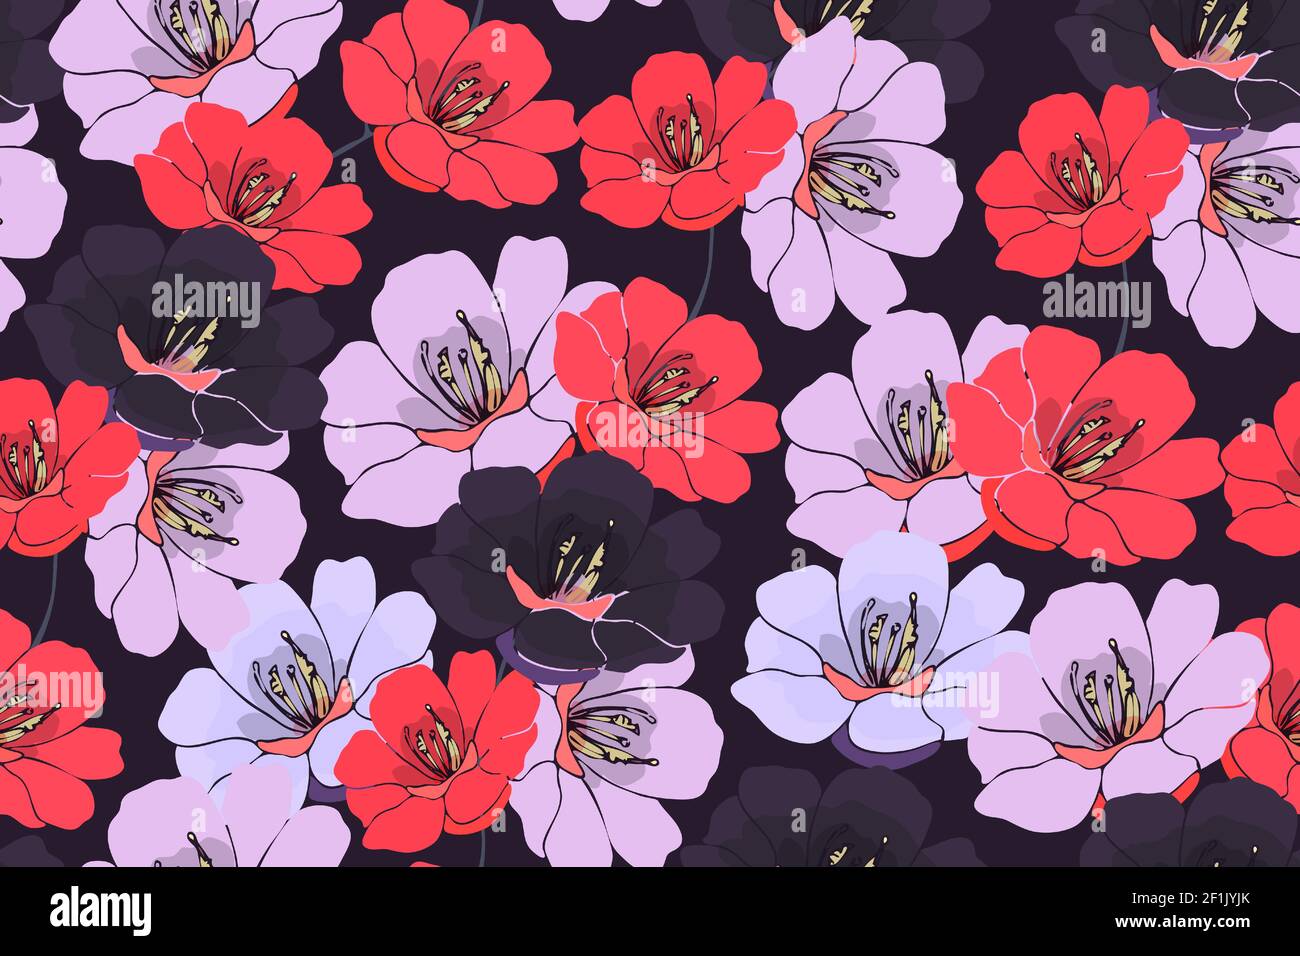 Vector floral seamless pattern. Pink, red, dark purple flowers isolated on a dark purple background. Stock Vector